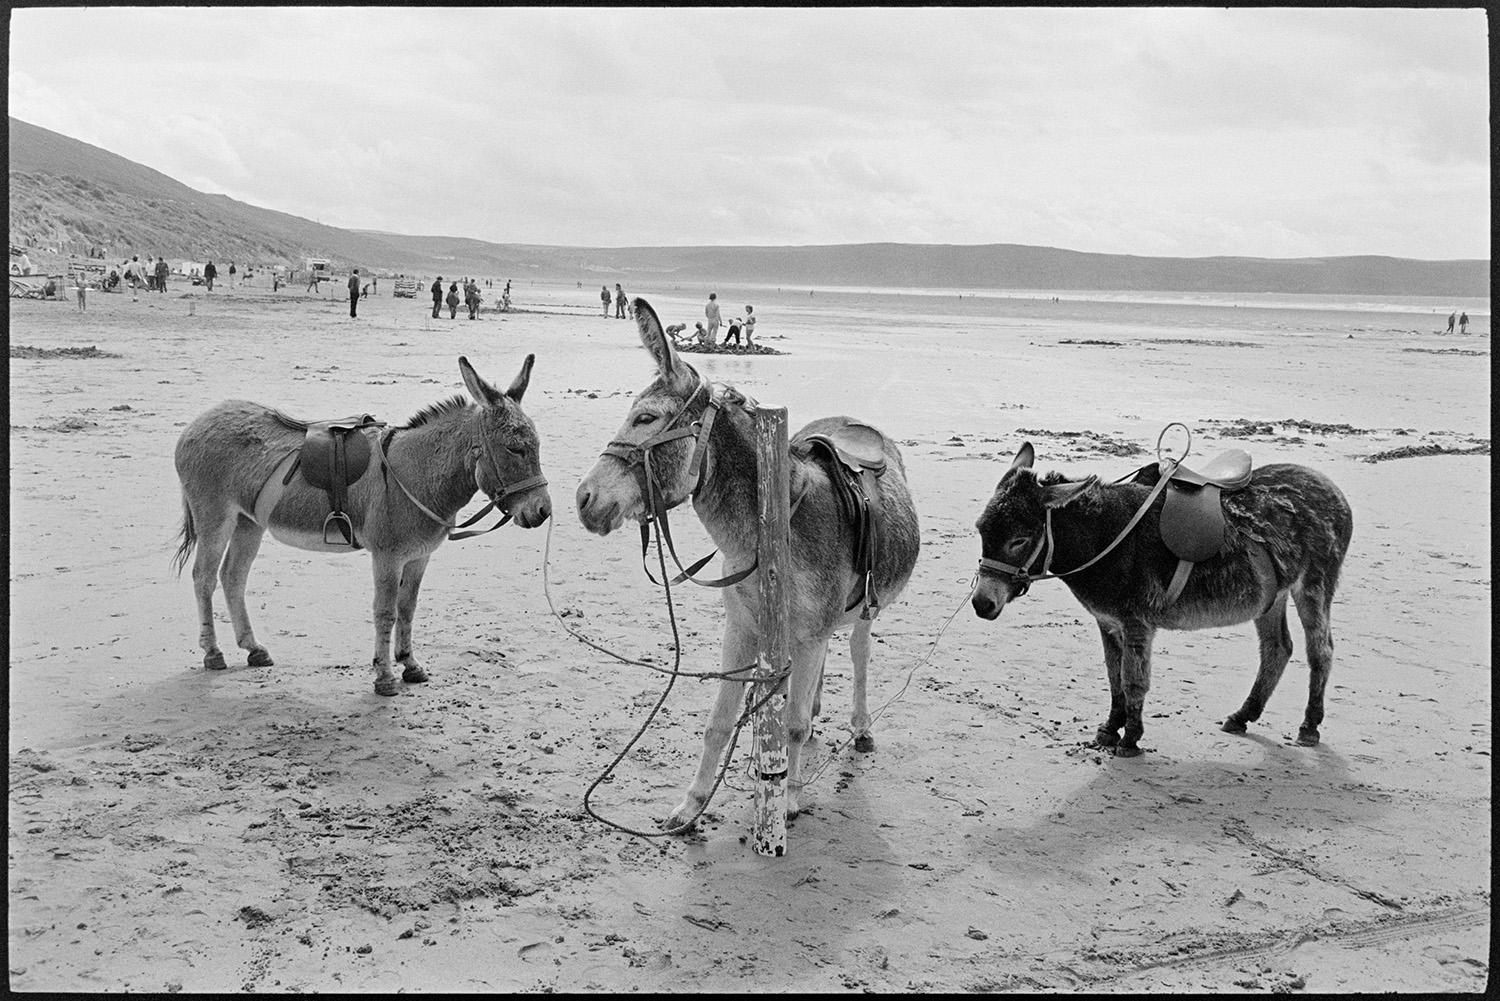 Beach scenes with donkey rides, bathing huts, people swimming.
[Three donkeys with saddles, waiting to give rides at Woolacombe beach. They are tethered to a wooden post on the beach. Holidaymakers can be seen in the background.]